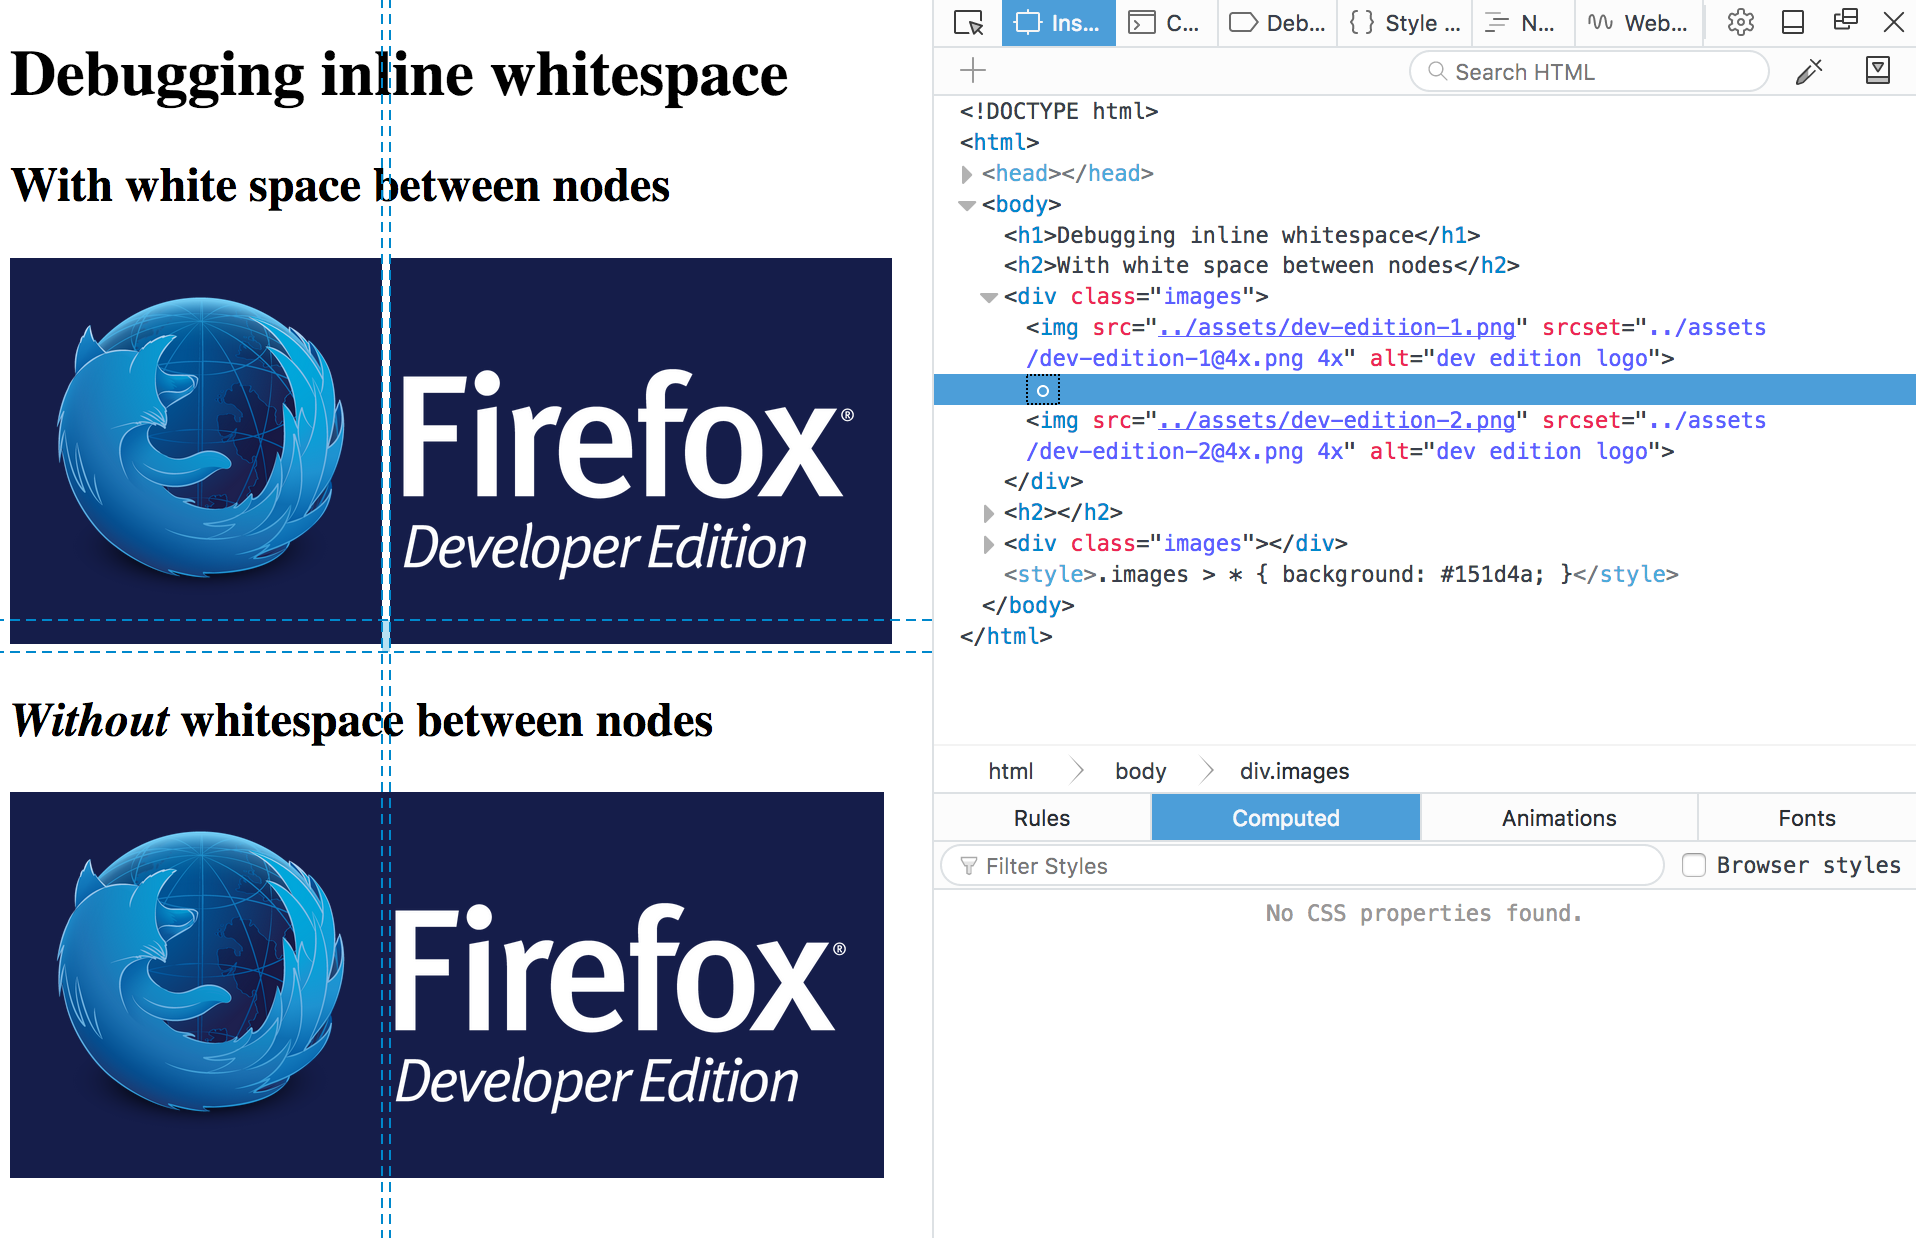 Whitespace debugging in DevTools in action